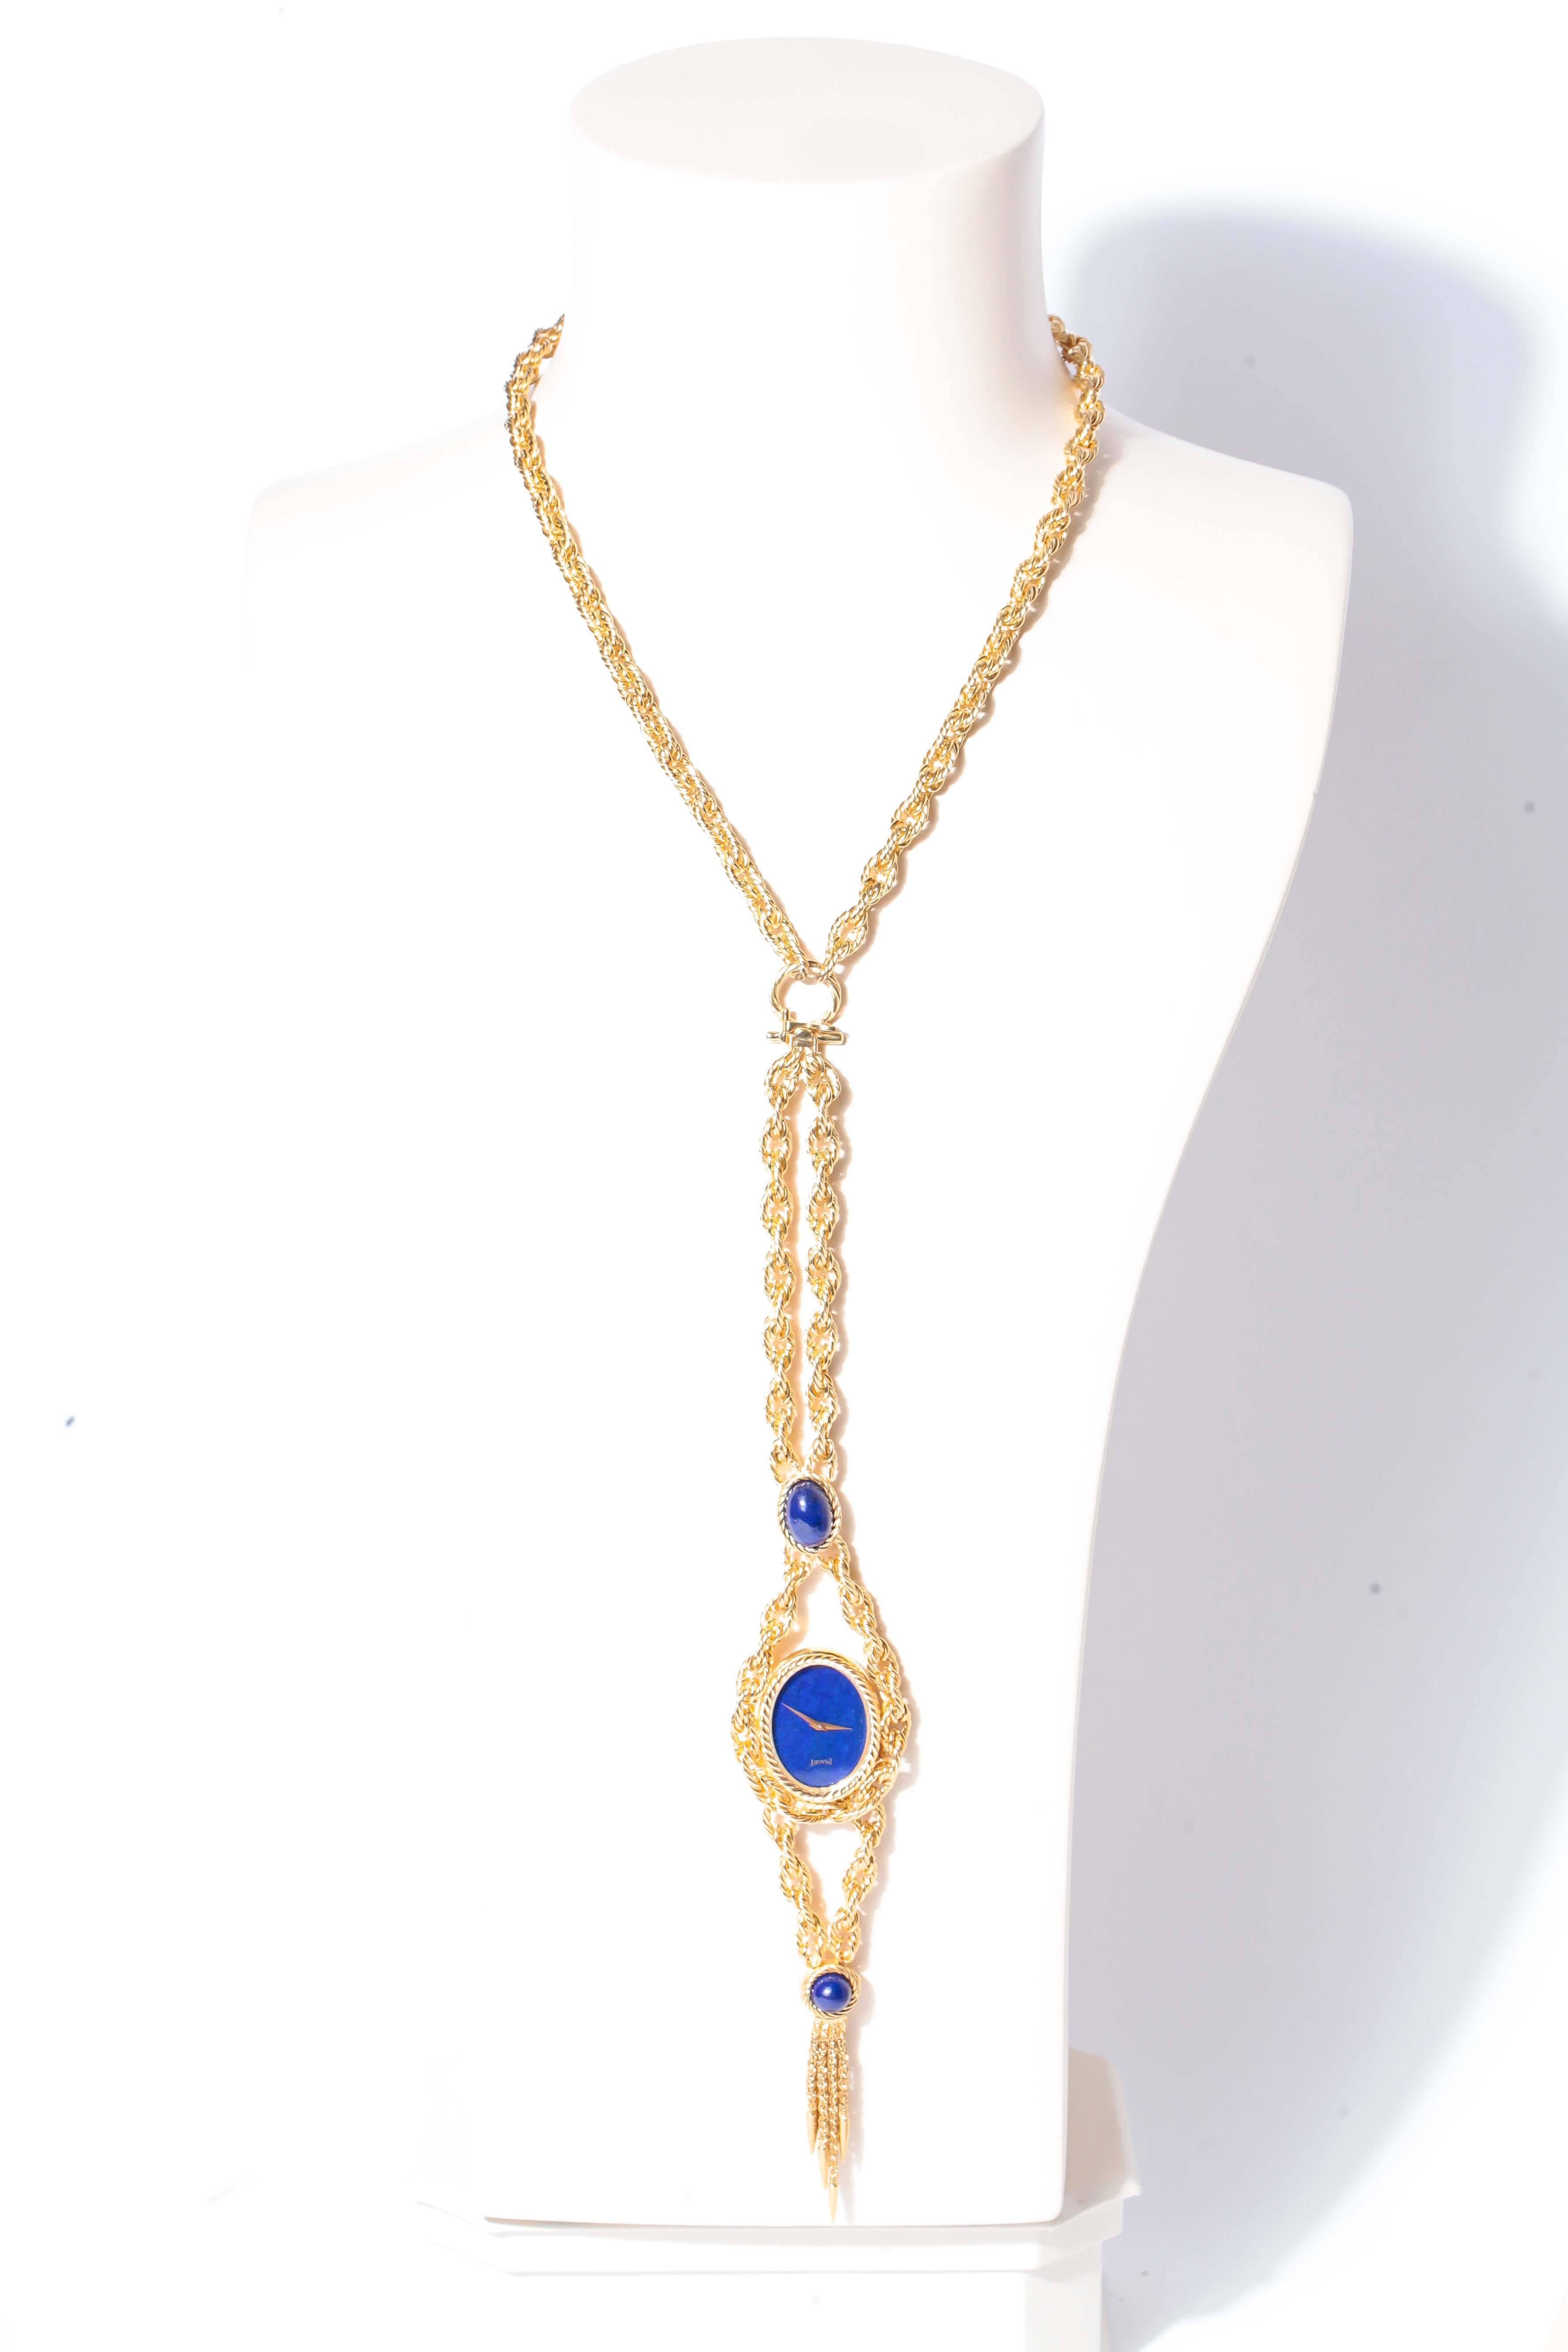 Piaget 18KY  Lapis Lazuli necklace/ bracelet watch. Watch has a textured bezel and an oval Lapis Lazuli dial and two lapis cabochons on bracelet. Chain is 18KY texture oval links measuring 24 inches in length. Wristwatch measures approximately